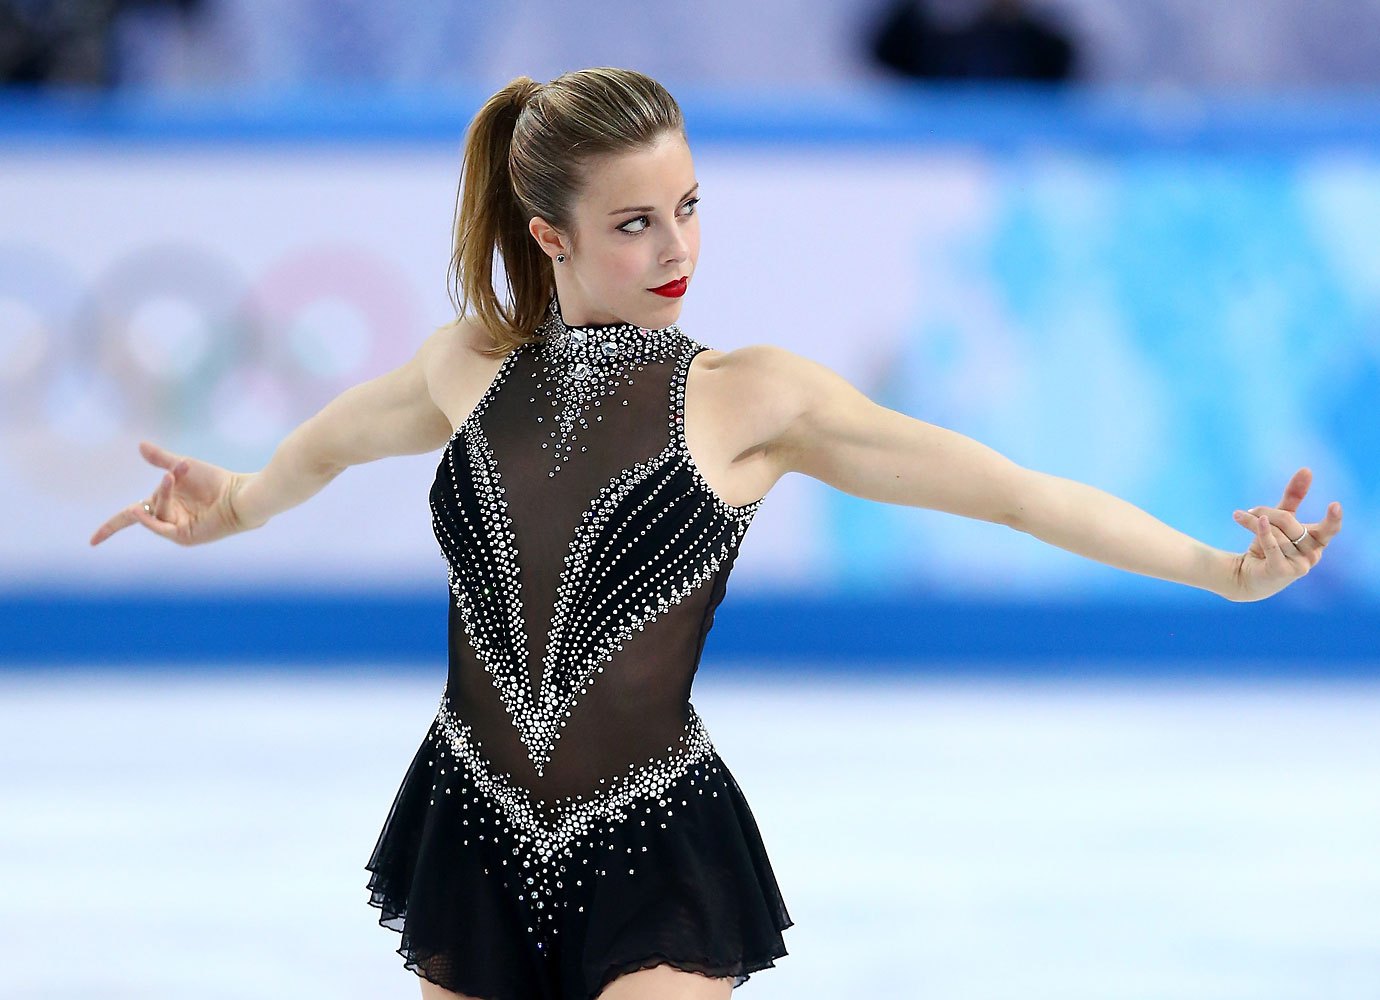 Ashley Wagner in the Figure Skating Team Ladies Short Program during day one of the Sochi 2014 Winter Olympics, Feb. 8, 2014.